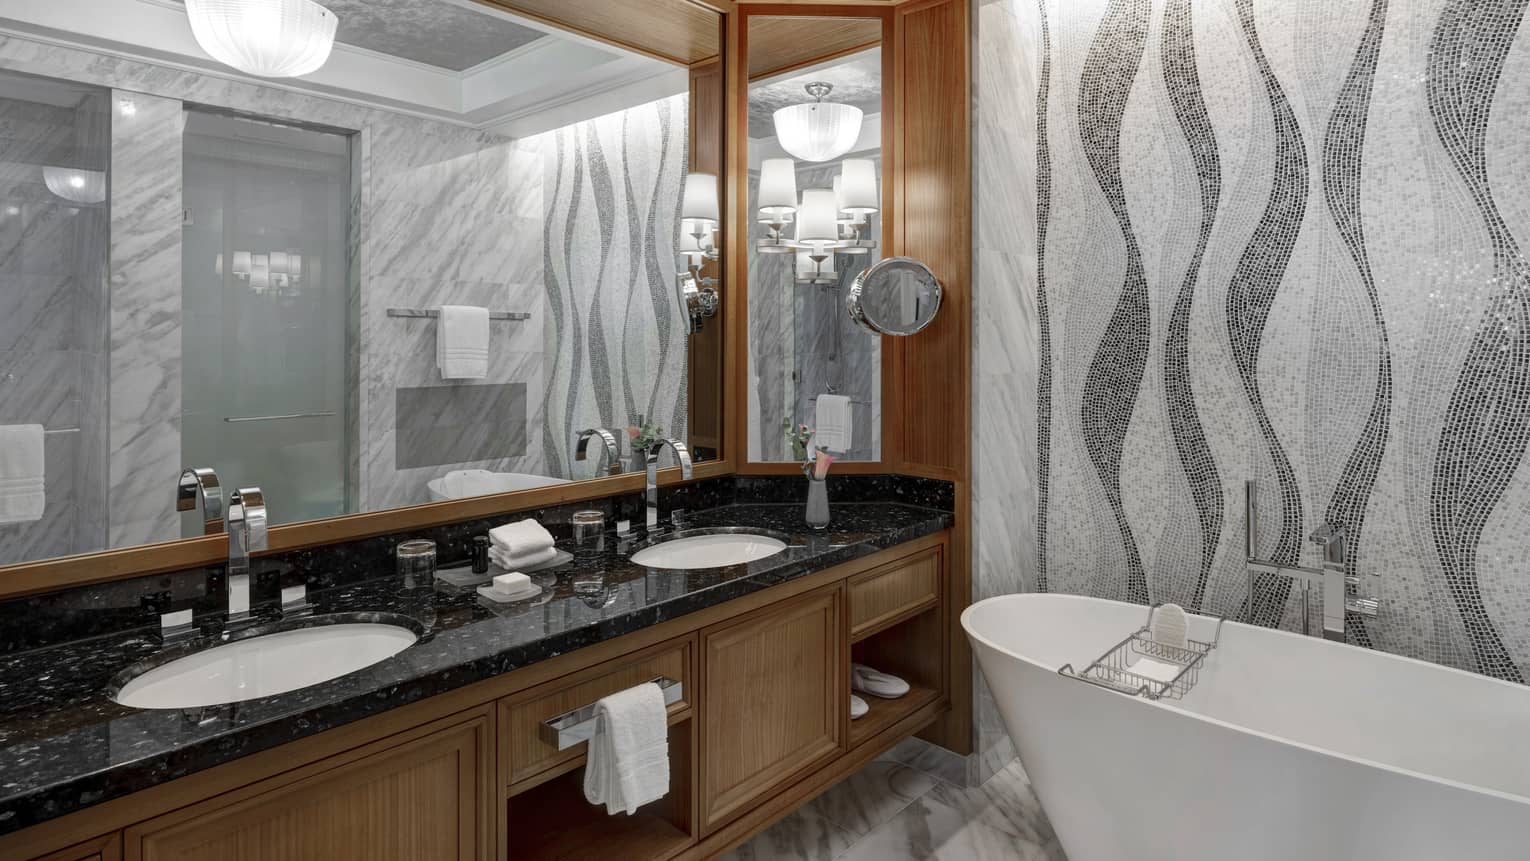 Bathroom with grey mosaic tiled wall, freestanding tub, wooden vanity with black top